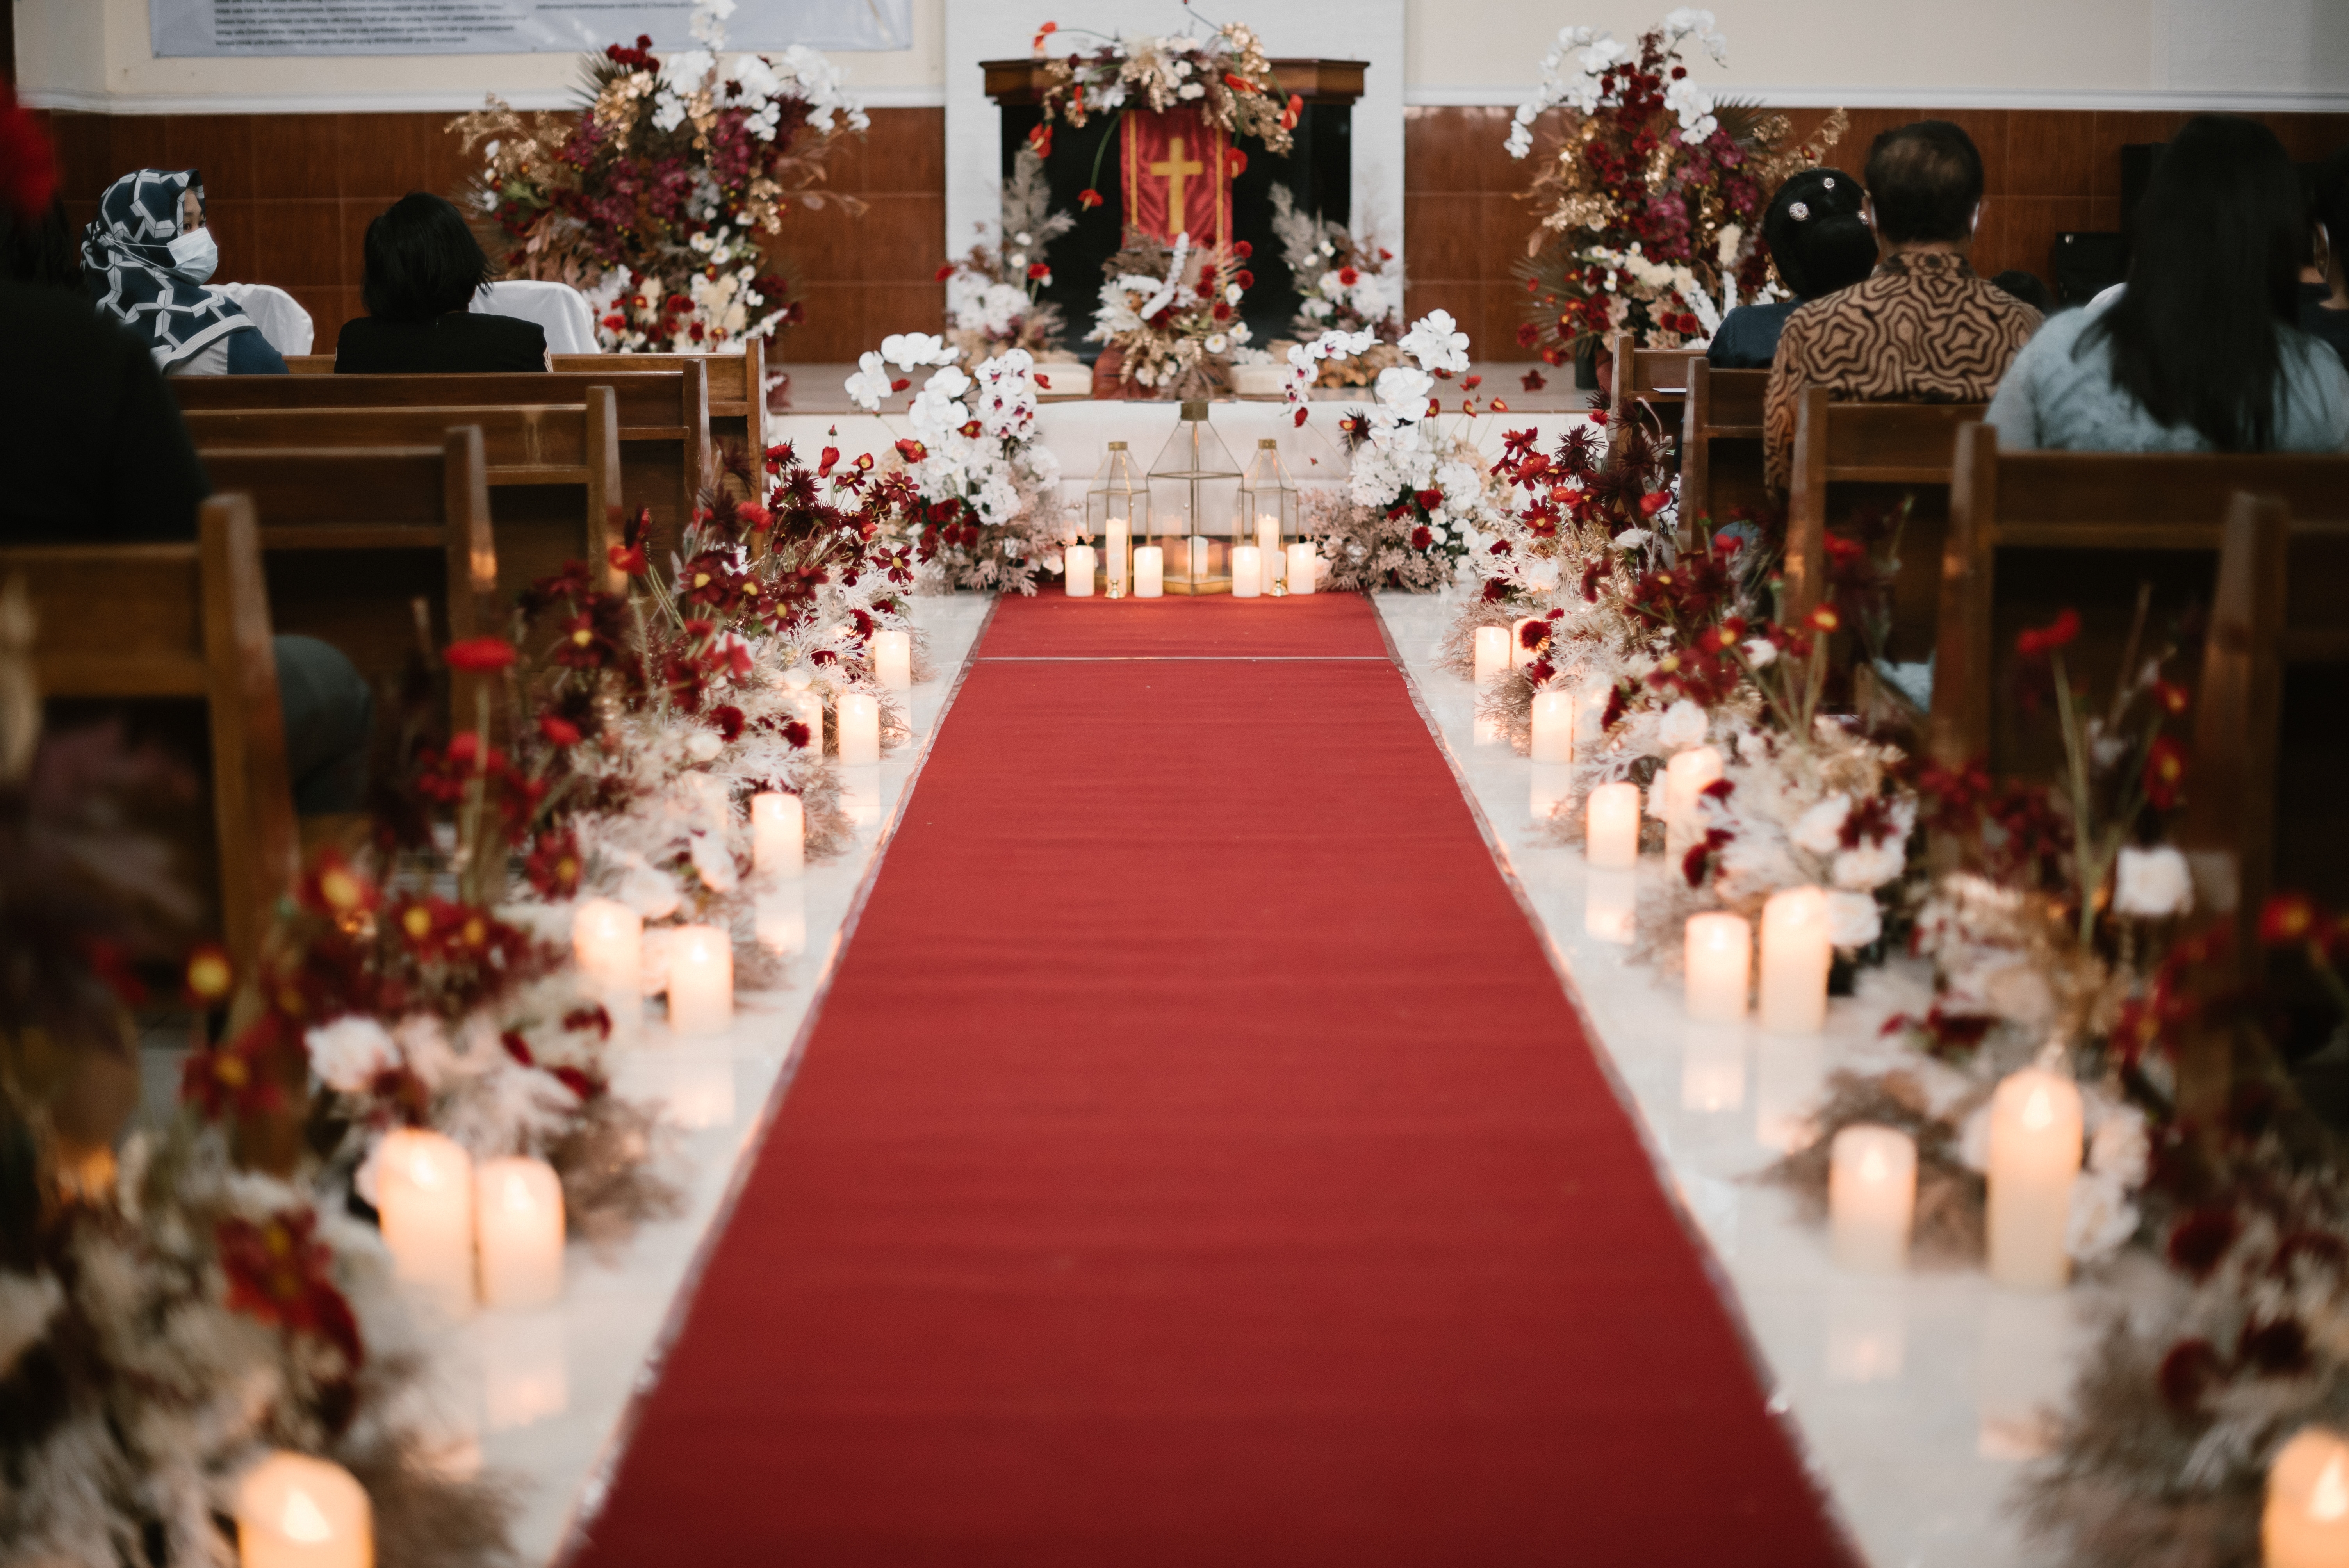 An aisle lined with candles at a wedding | Source: Shutterstock